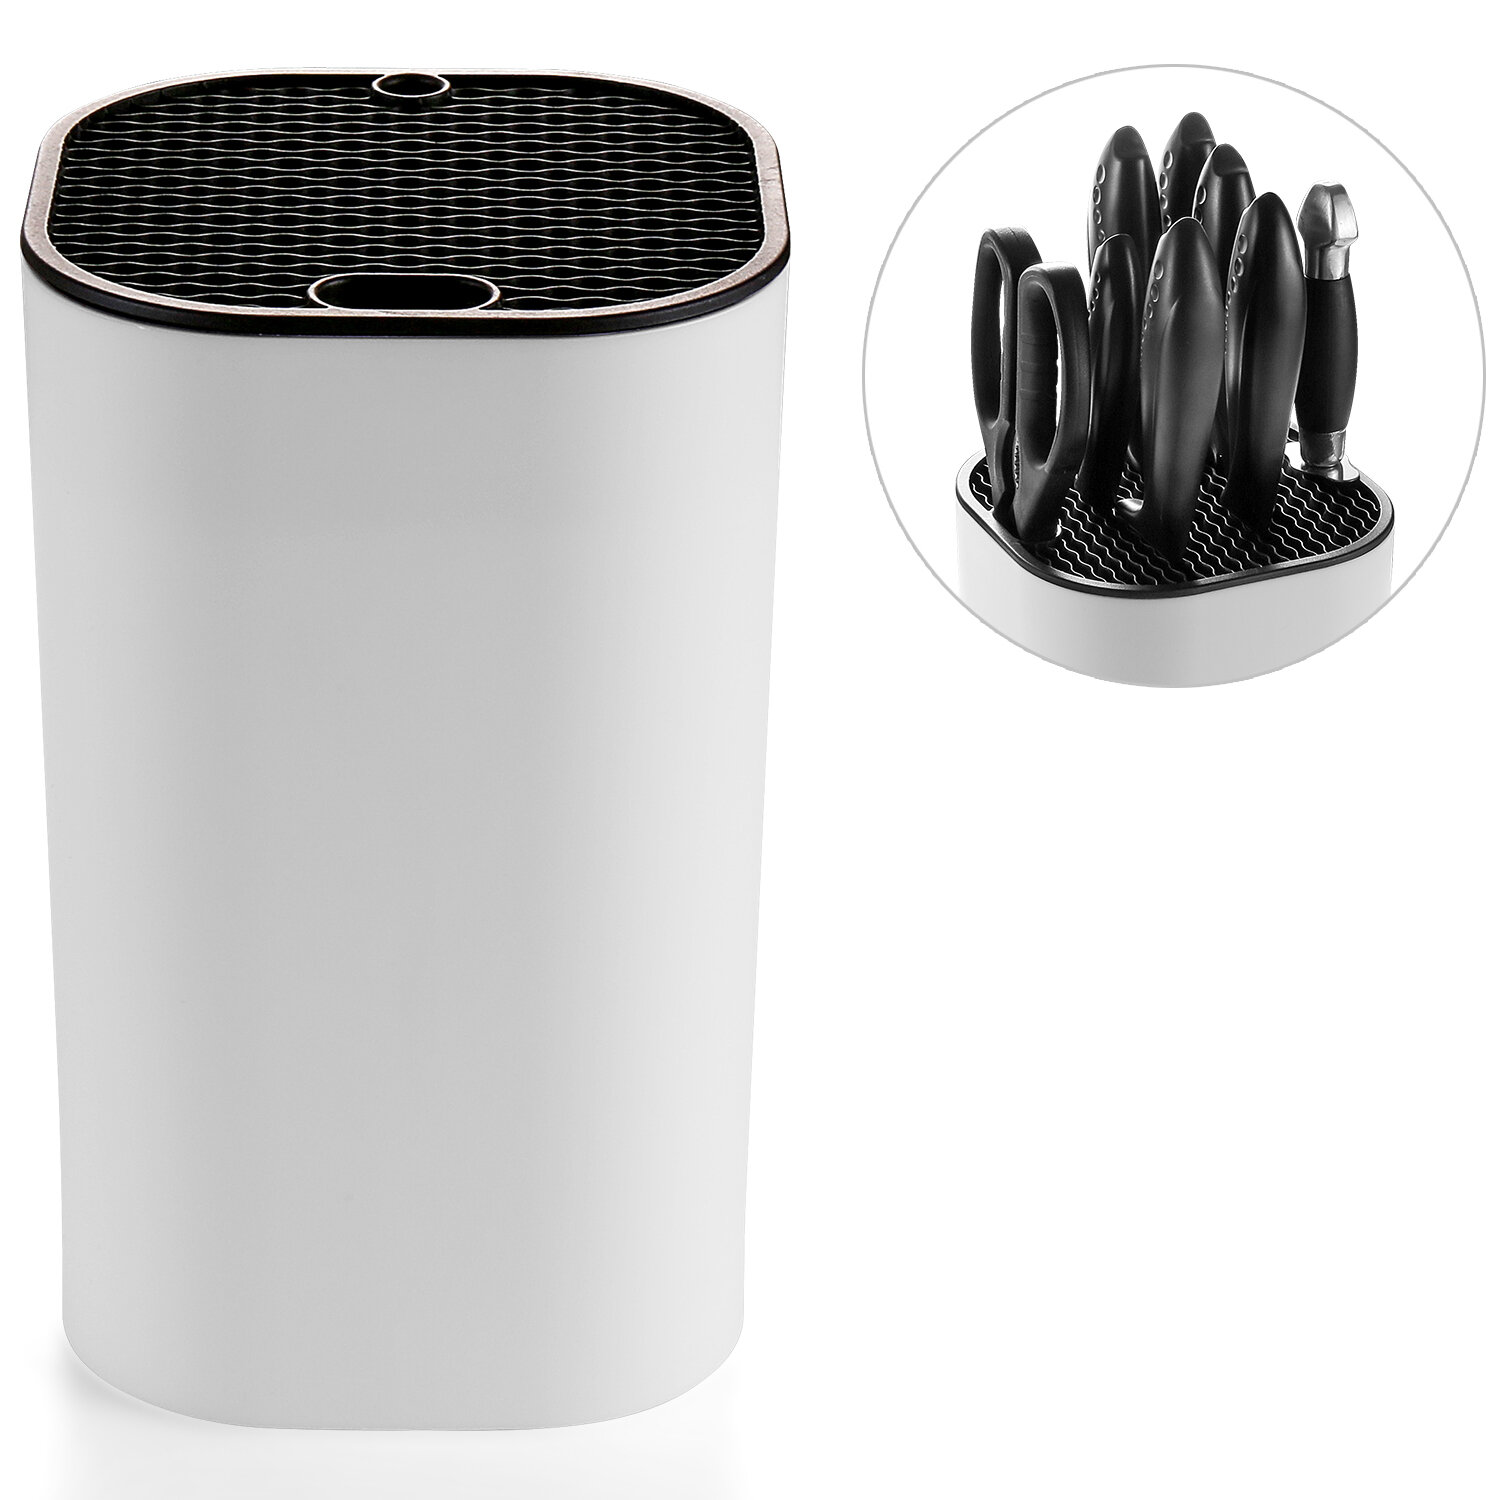 Universal Knife Storage Stand, Knife Block Holder Without Knives, Space  Saver Knife Organizer Slot To Protect Blades Detachable For Easy  Cleaning(blac